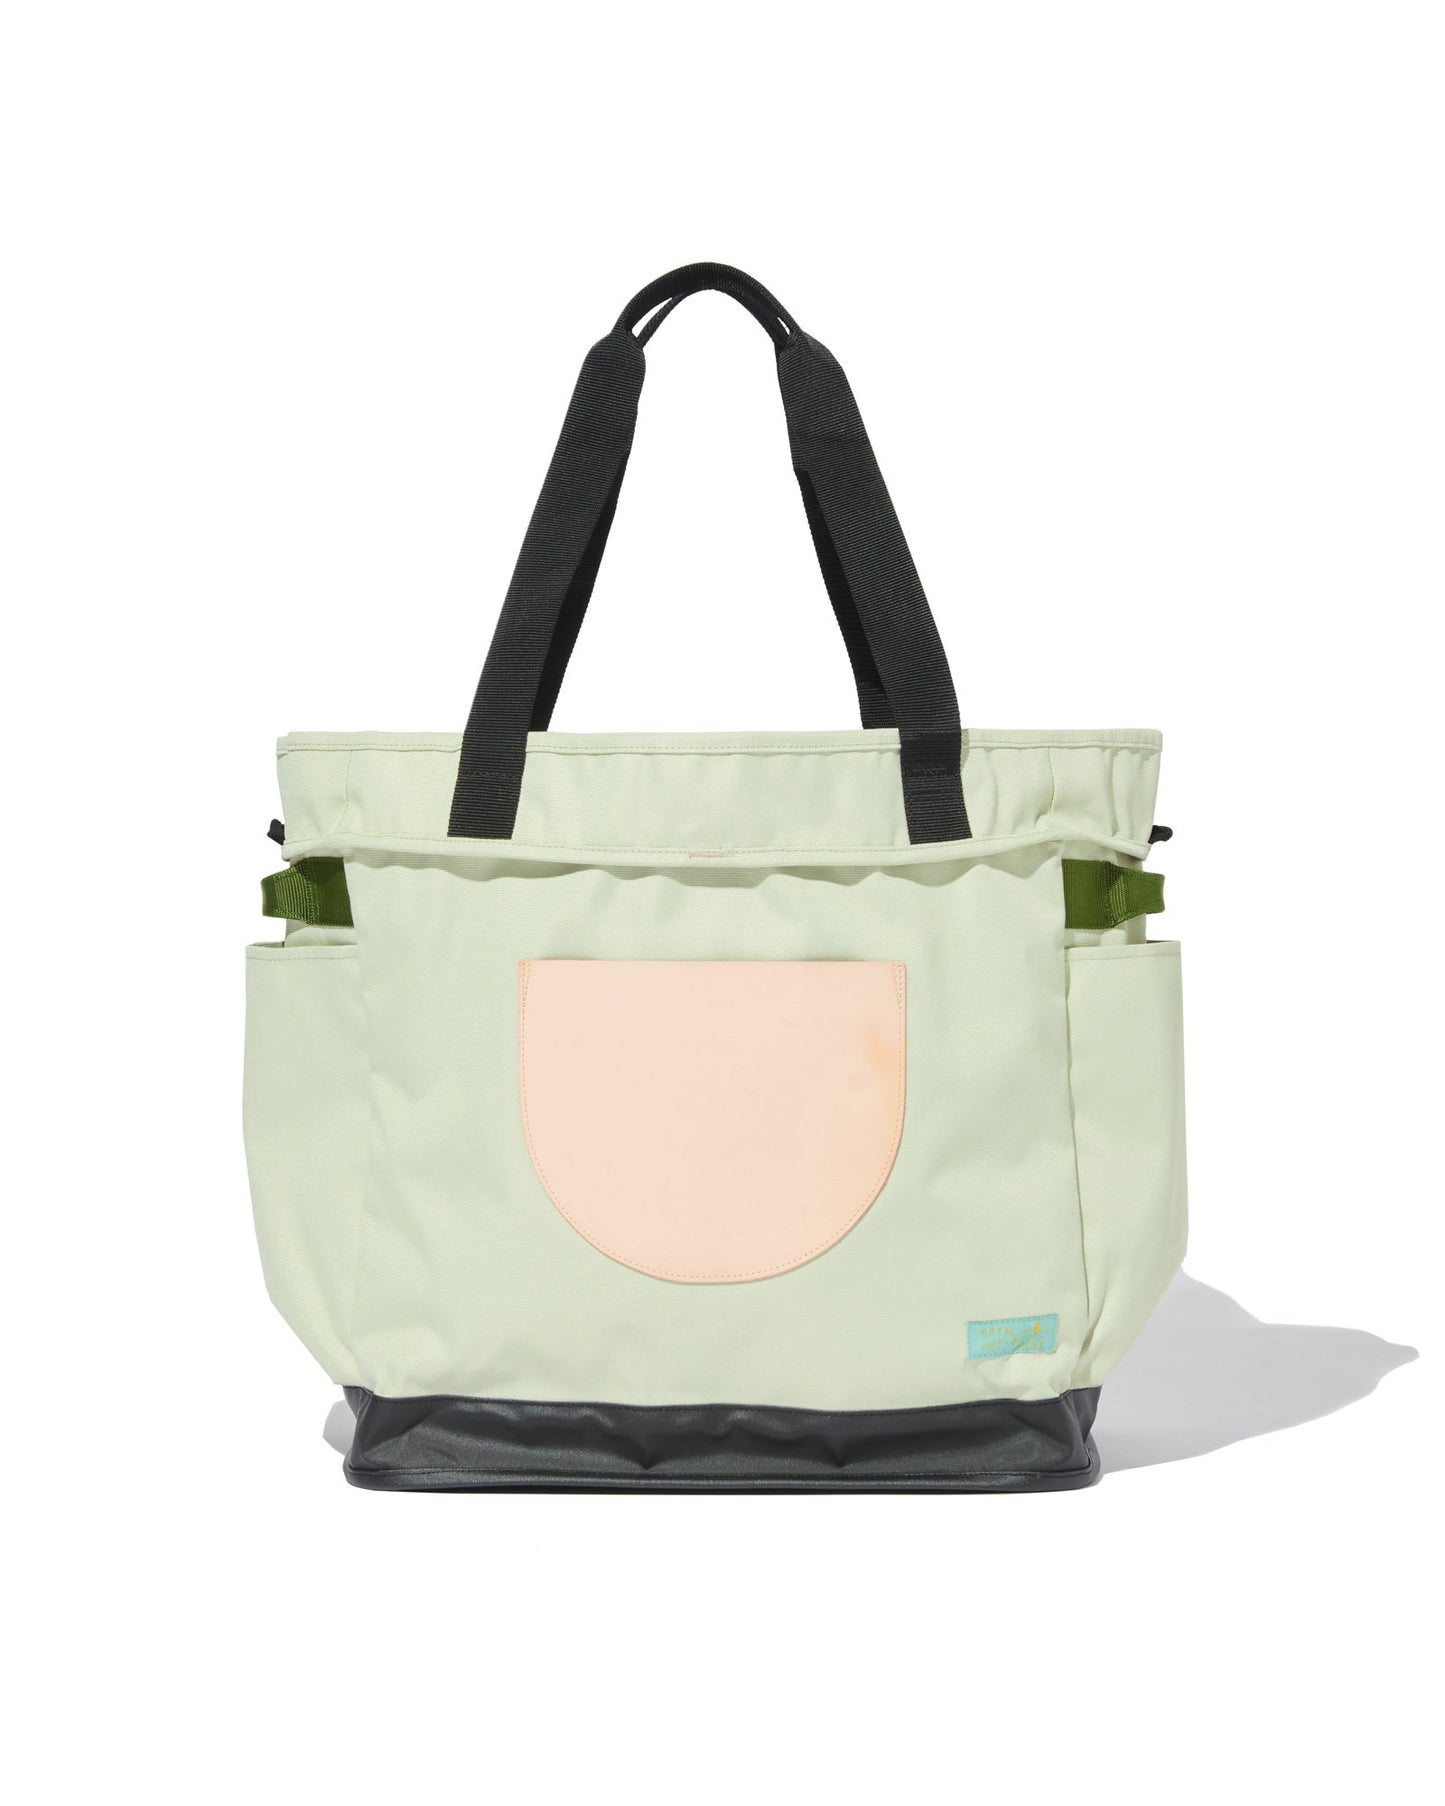 CALM AND RIDE 3DAYS TRIP TOTE